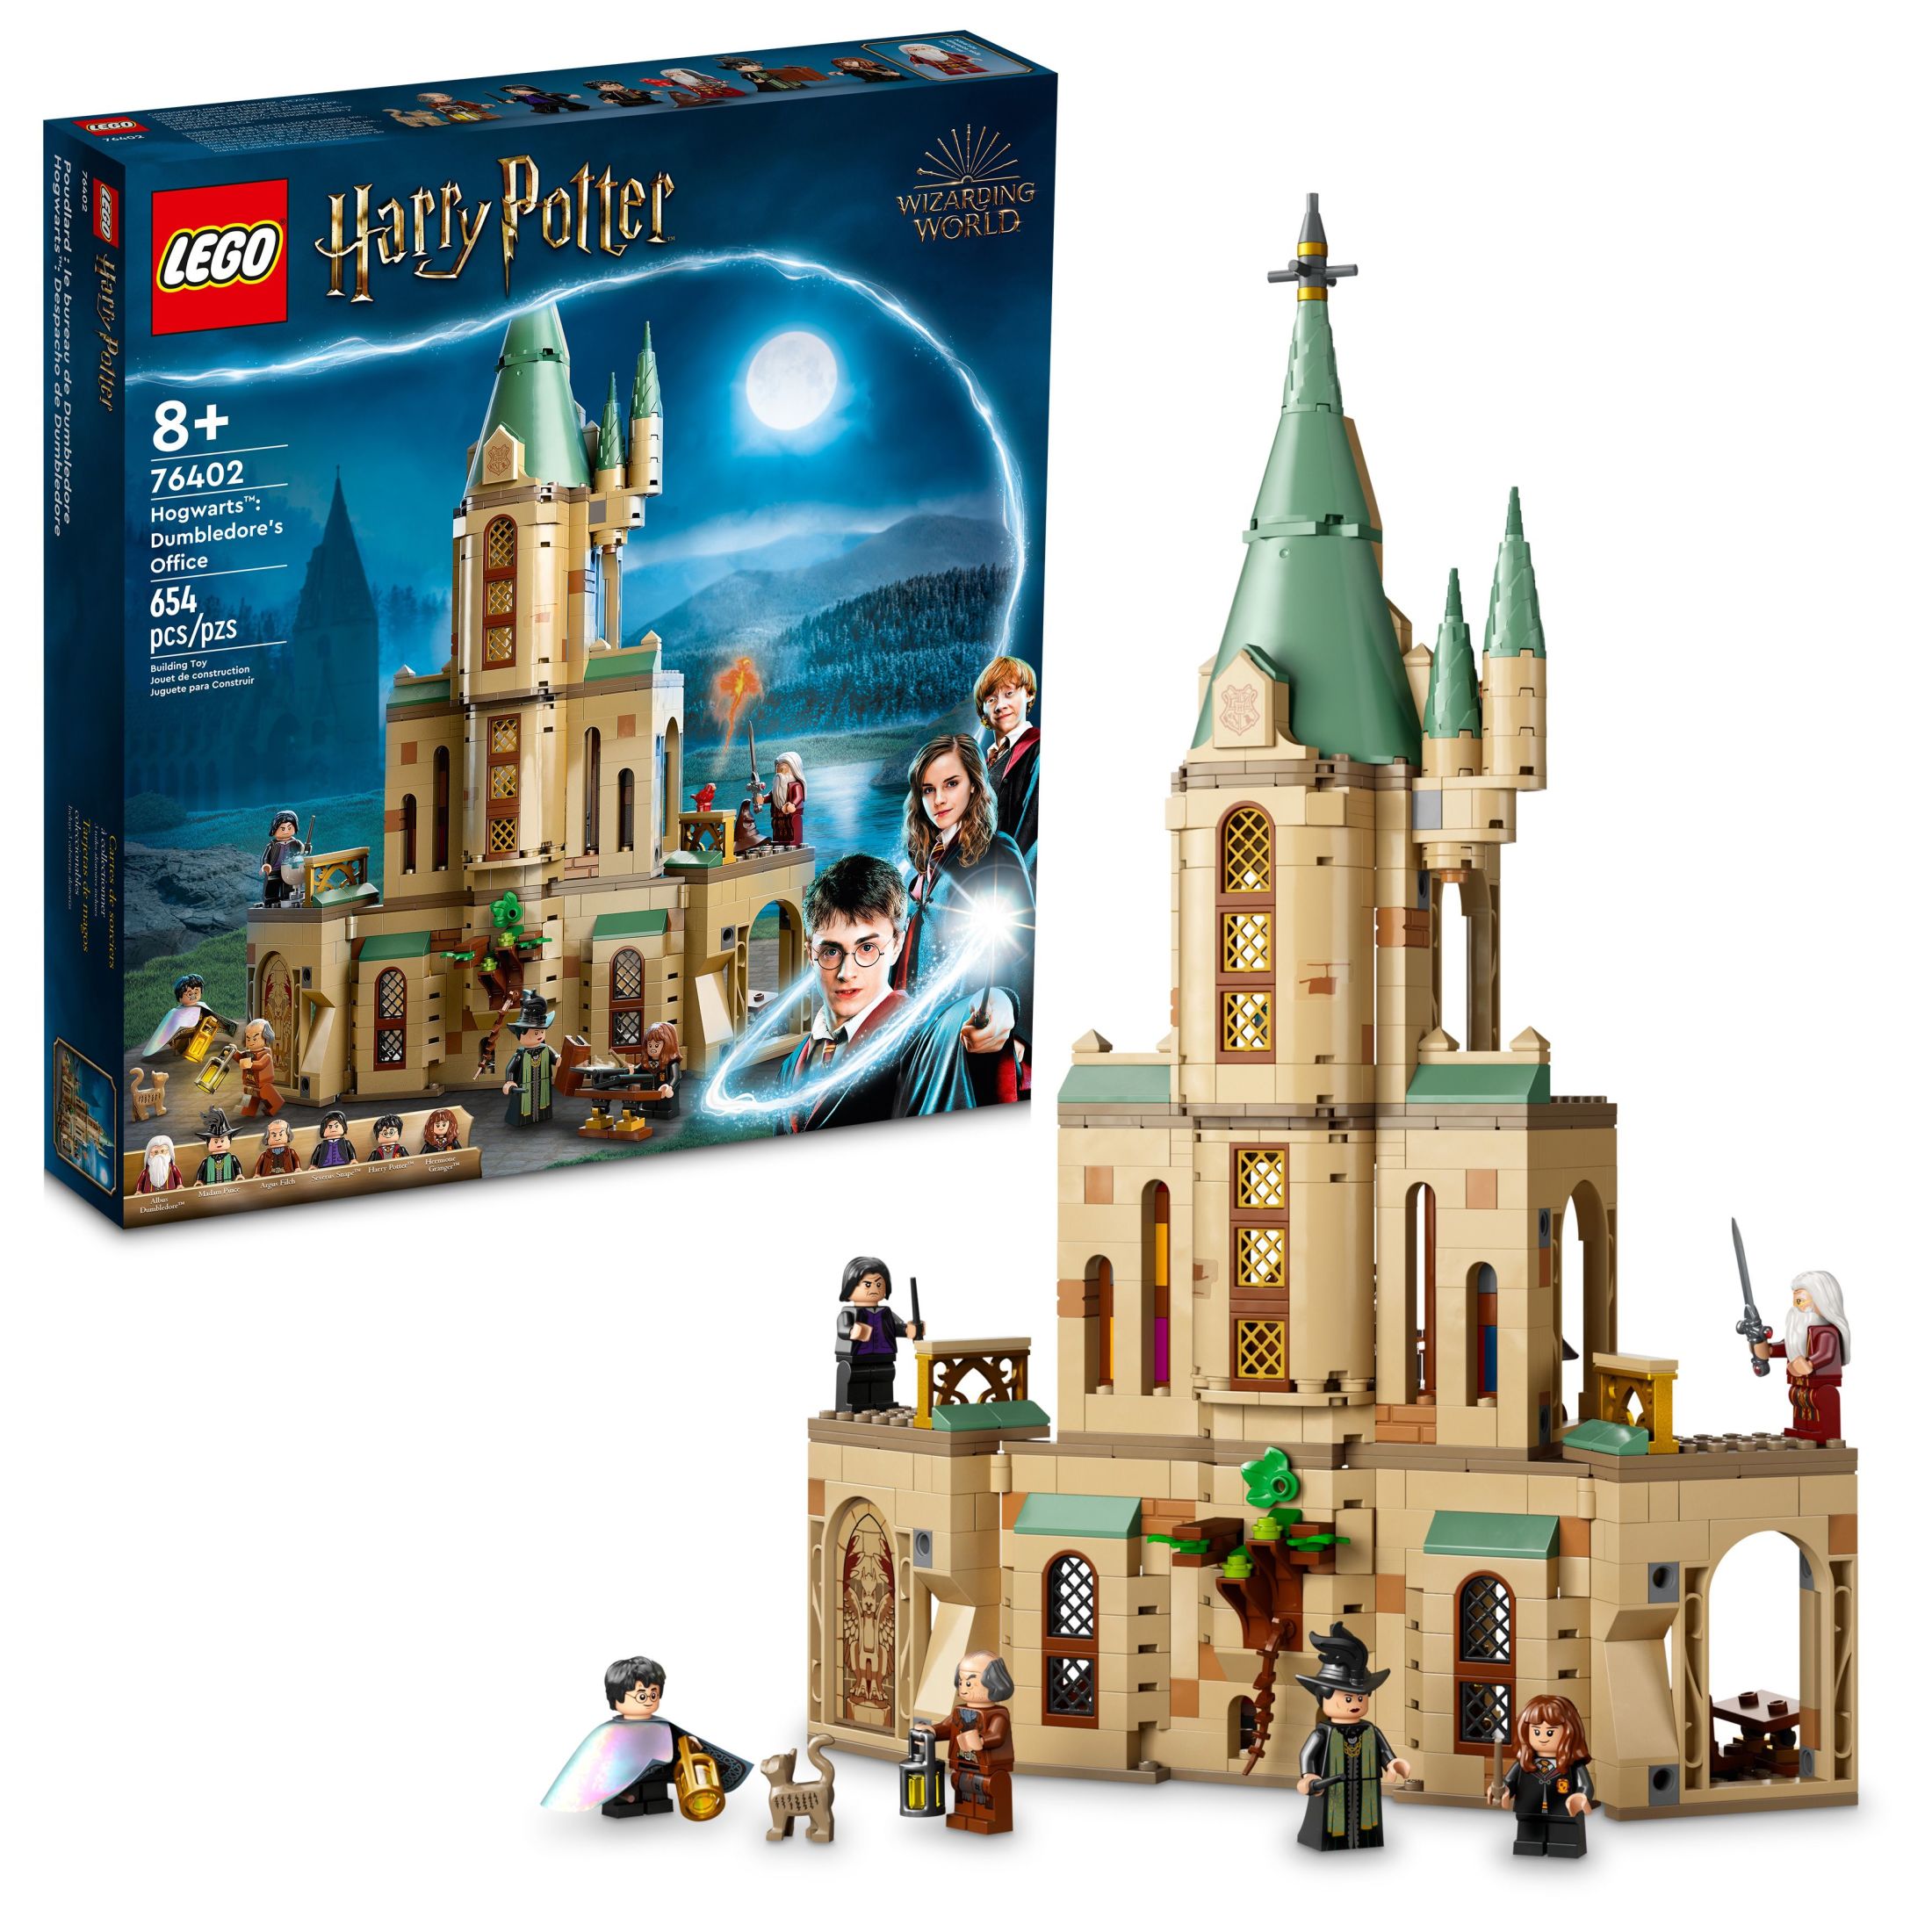 LEGO Harry Potter Hogwarts: Dumbledore’s Office 76402 Castle Toy, Set with Sorting Hat, Sword of Gryffindor and 6 Minifigures, for Kids Aged 8 Plus - image 1 of 8